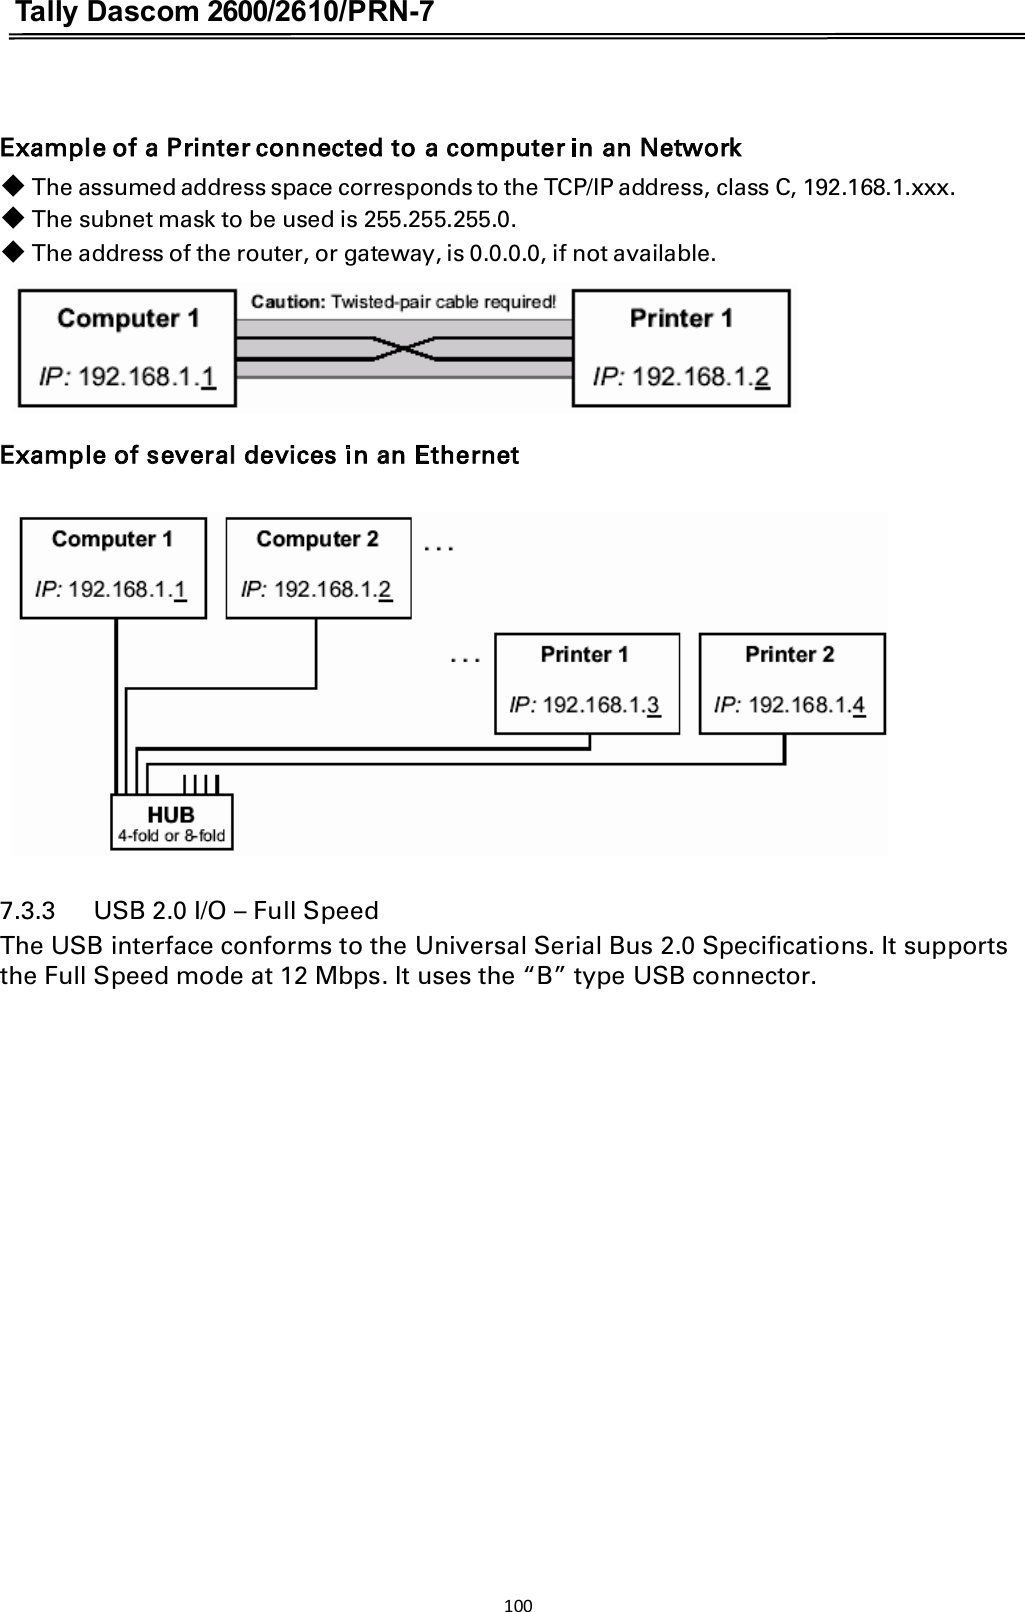 Tally Dascom 2600/2610/PRN-7   Example of a Printer connected to a computer in an Network 䕺 The assumed address space corresponds to the TCP/IP address, class C, 192.168.1.xxx. 䕺 The subnet mask to be used is 255.255.255.0. 䕺 The address of the router, or gateway, is 0.0.0.0, if not available.     Example of several devices in an Ethernet       7.3.3      USB 2.0 I/O – Full Speed The USB interface conforms to the Universal Serial Bus 2.0 Specifications. It supports the Full Speed mode at 12 Mbps. It uses the “B” type USB connector.   100  